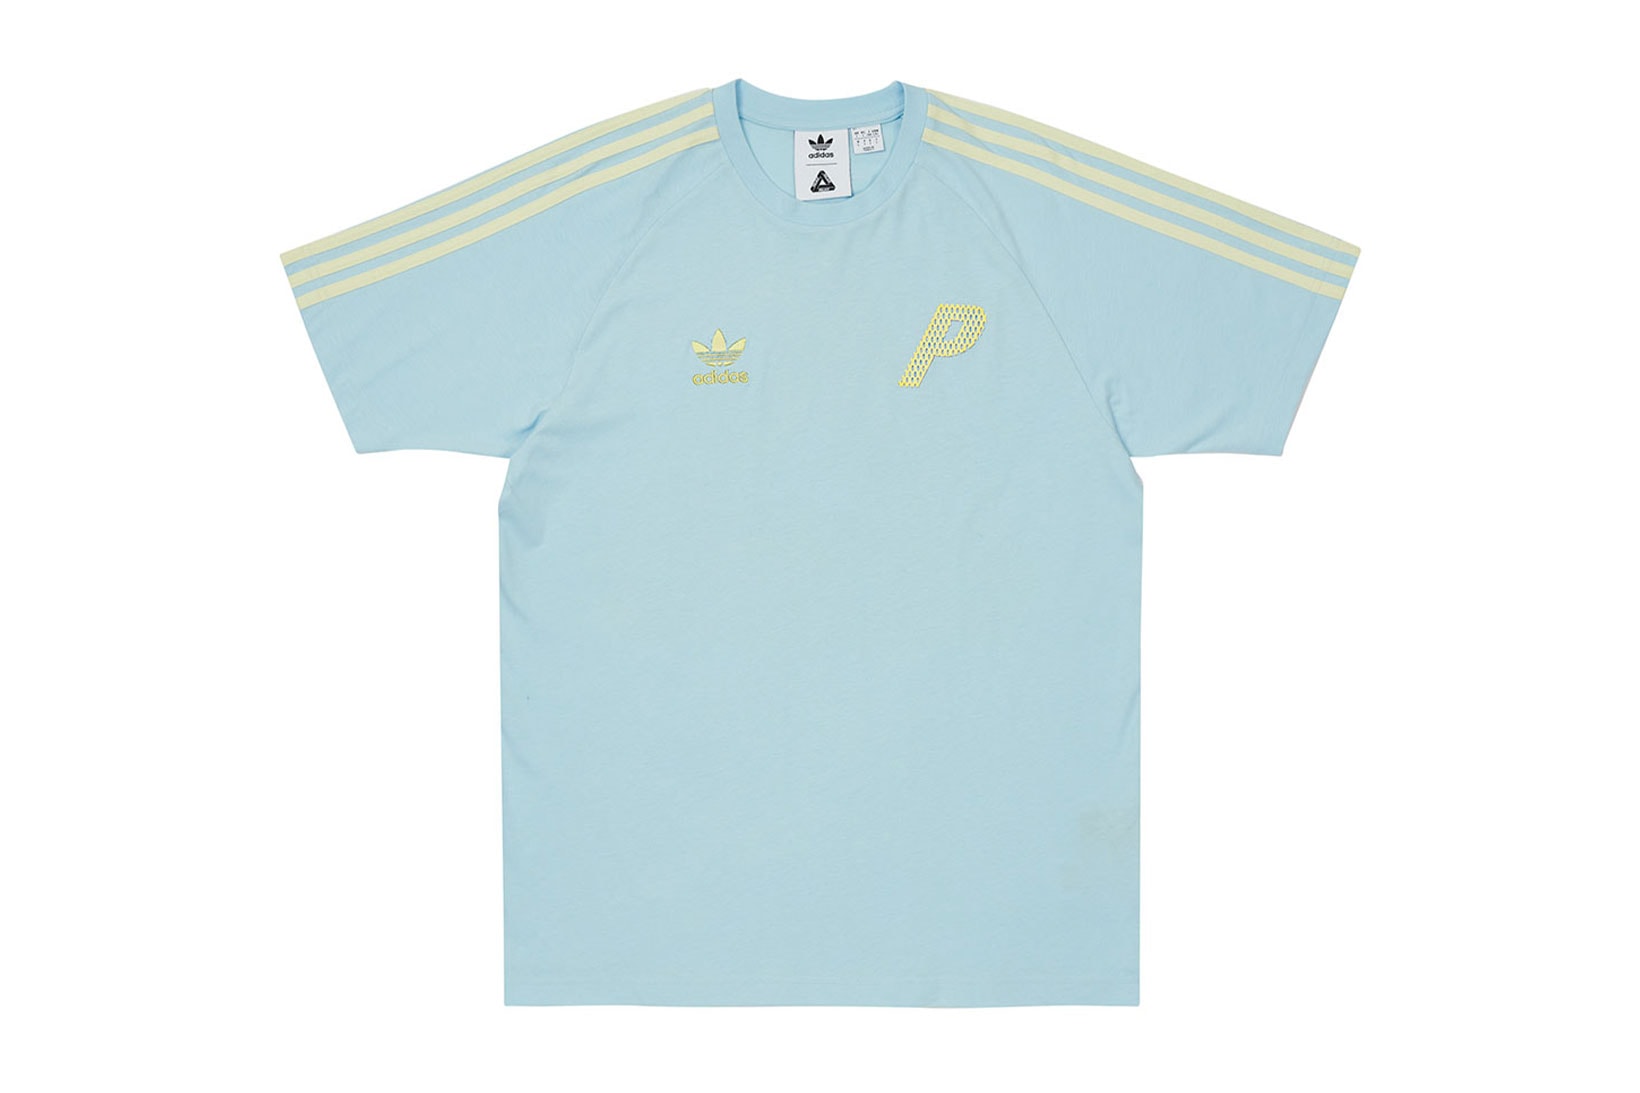 palace spring drop 4 collection adidas mini collaboration three stripes sky blue